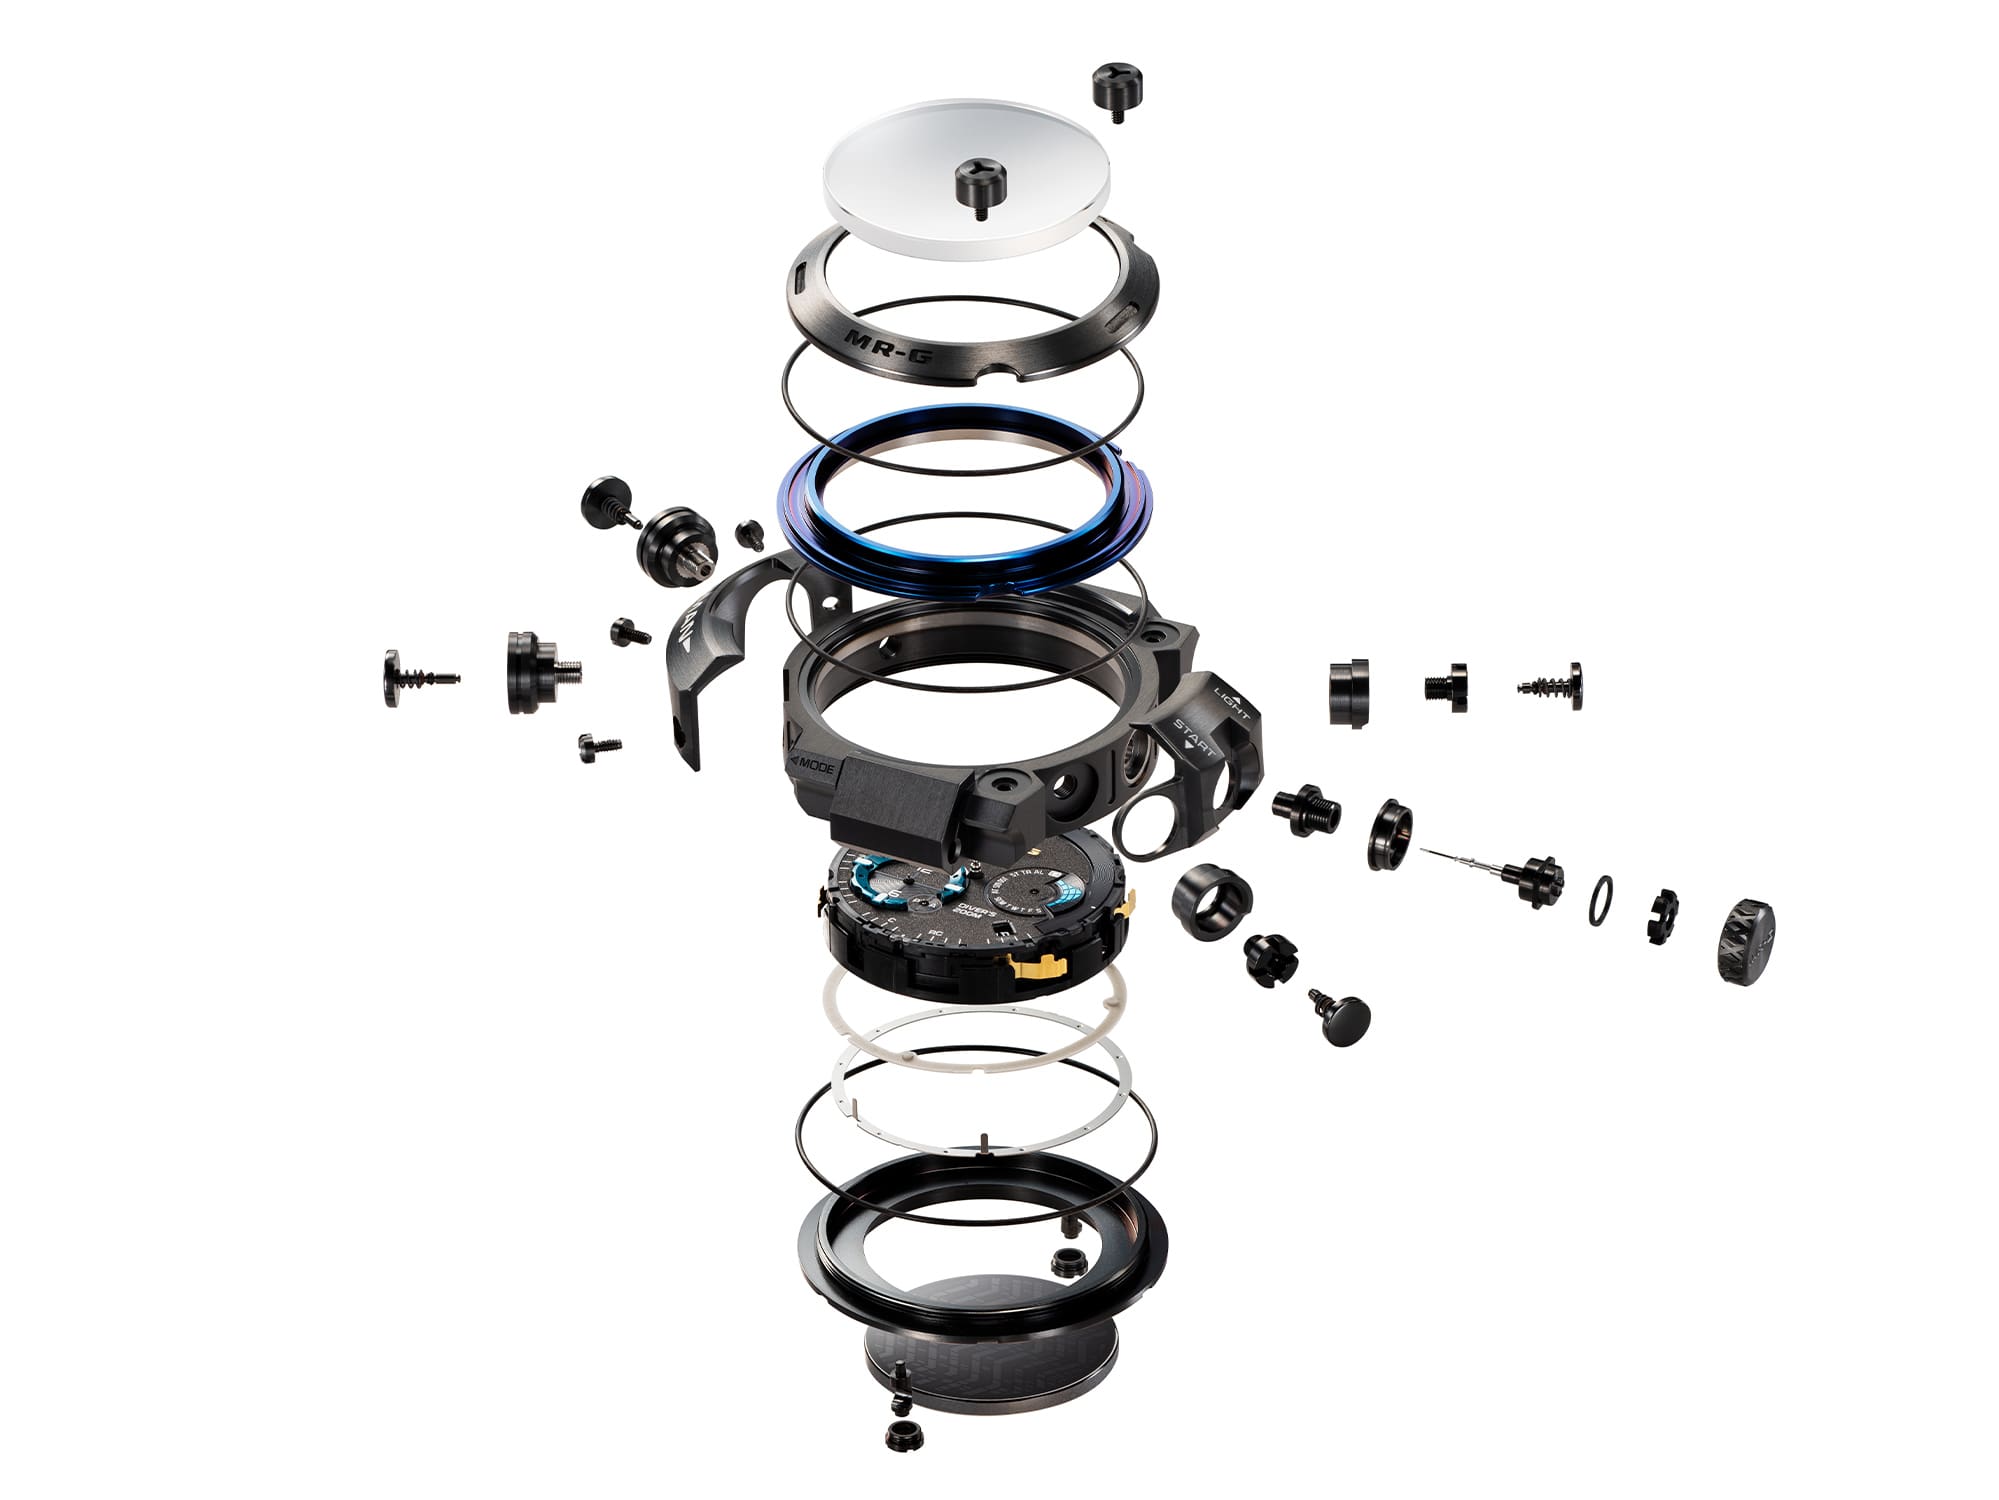 Exploded view of G-SHOCK watch